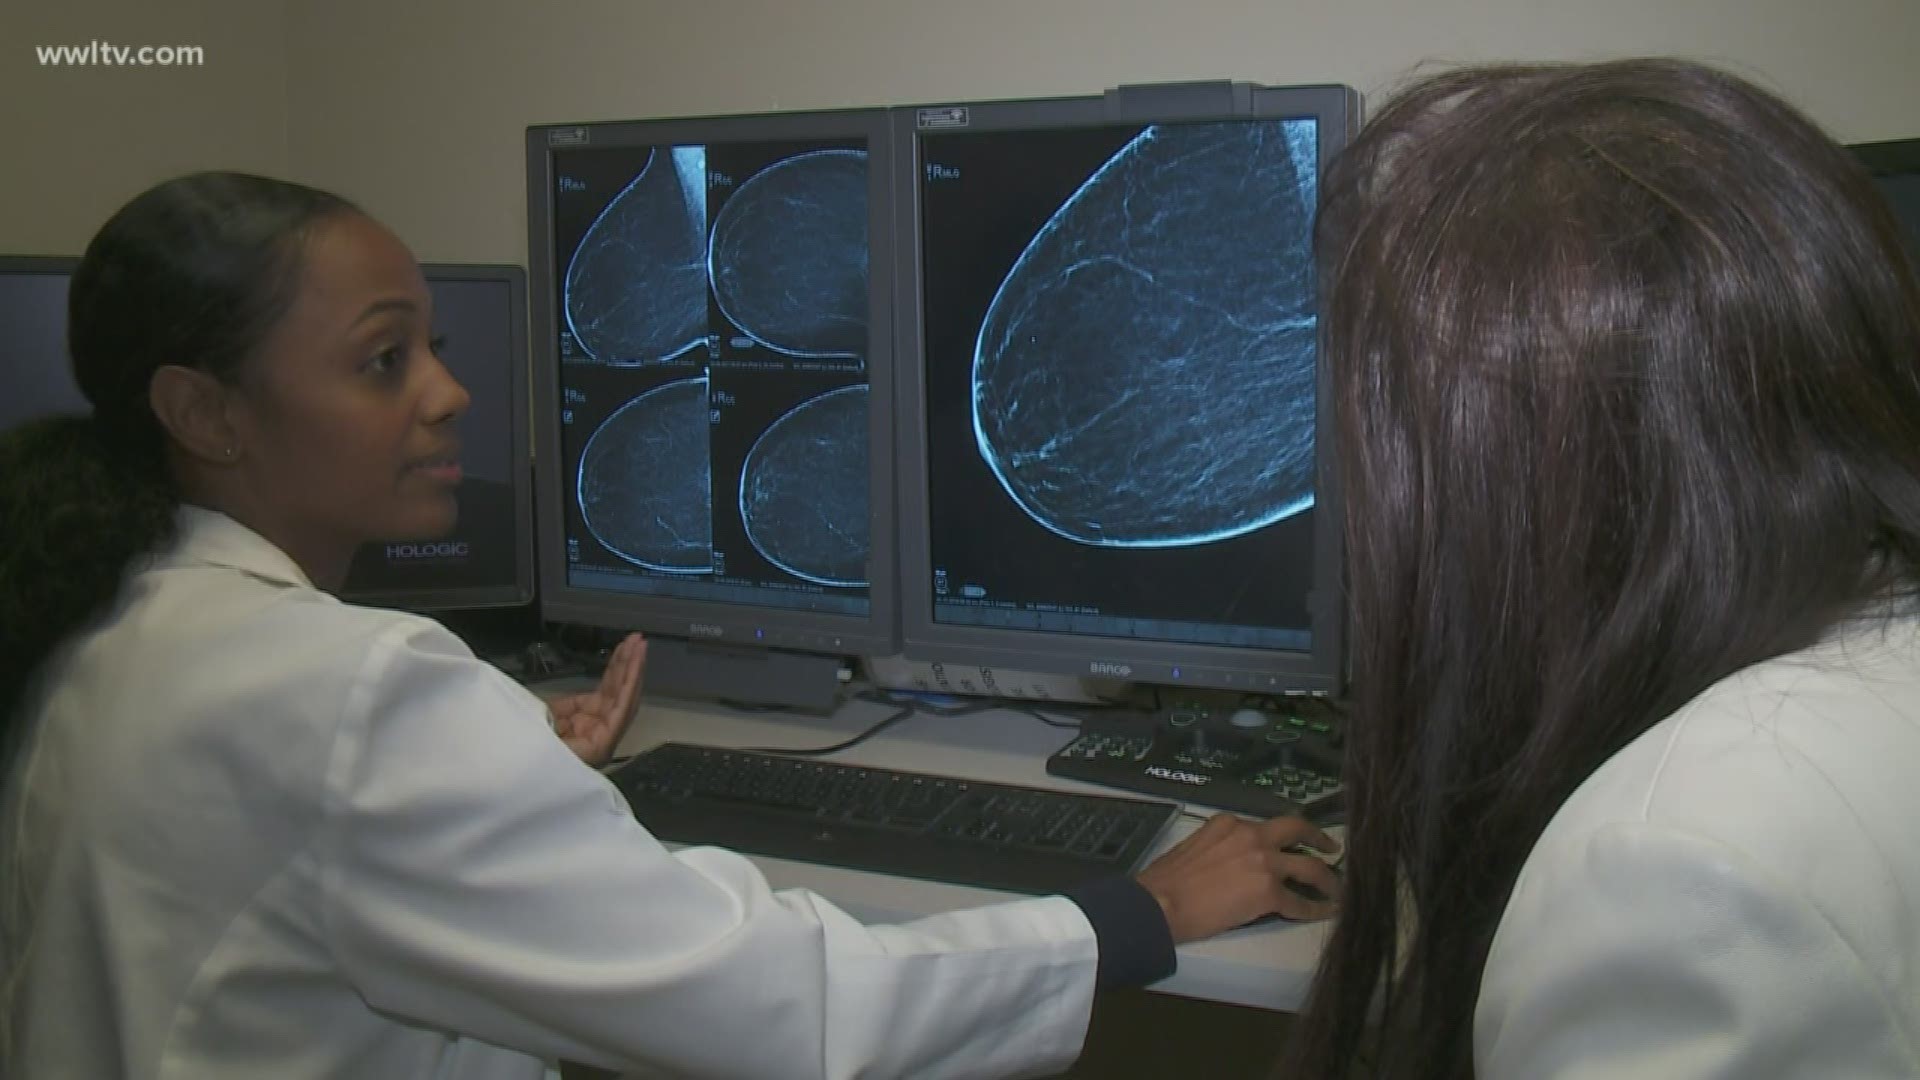 A study to determine whether there are benefits to using 3D mammograms as opposed to 2D mammograms.